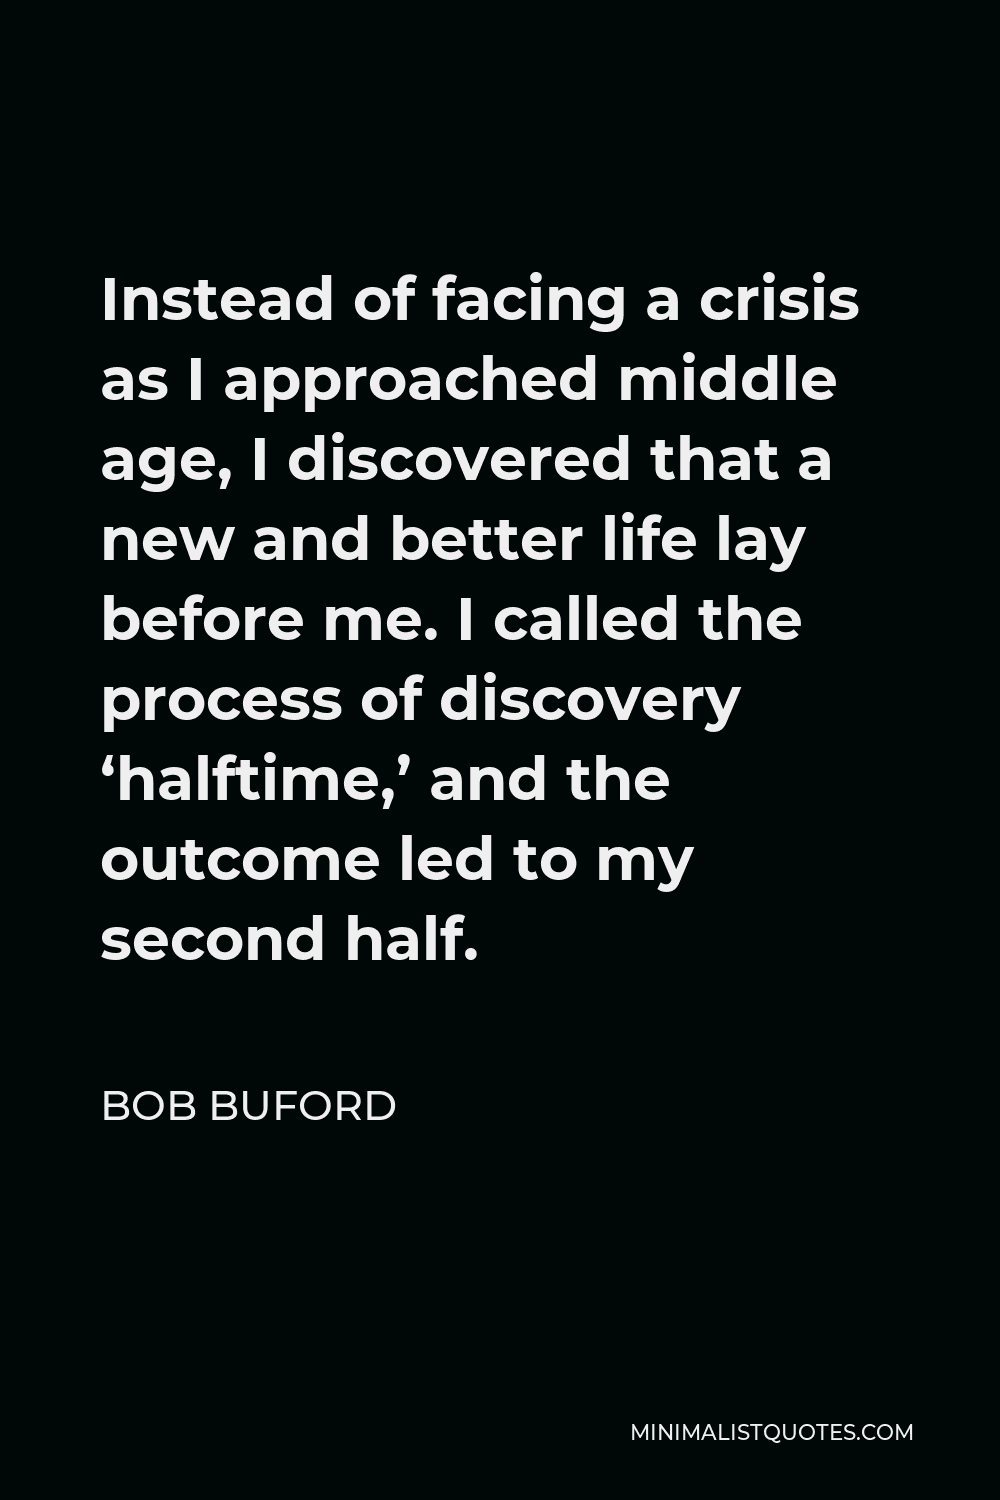 Bob Buford Quote - Instead of facing a crisis as I approached middle age, I discovered that a new and better life lay before me. I called the process of discovery ‘halftime,’ and the outcome led to my second half.